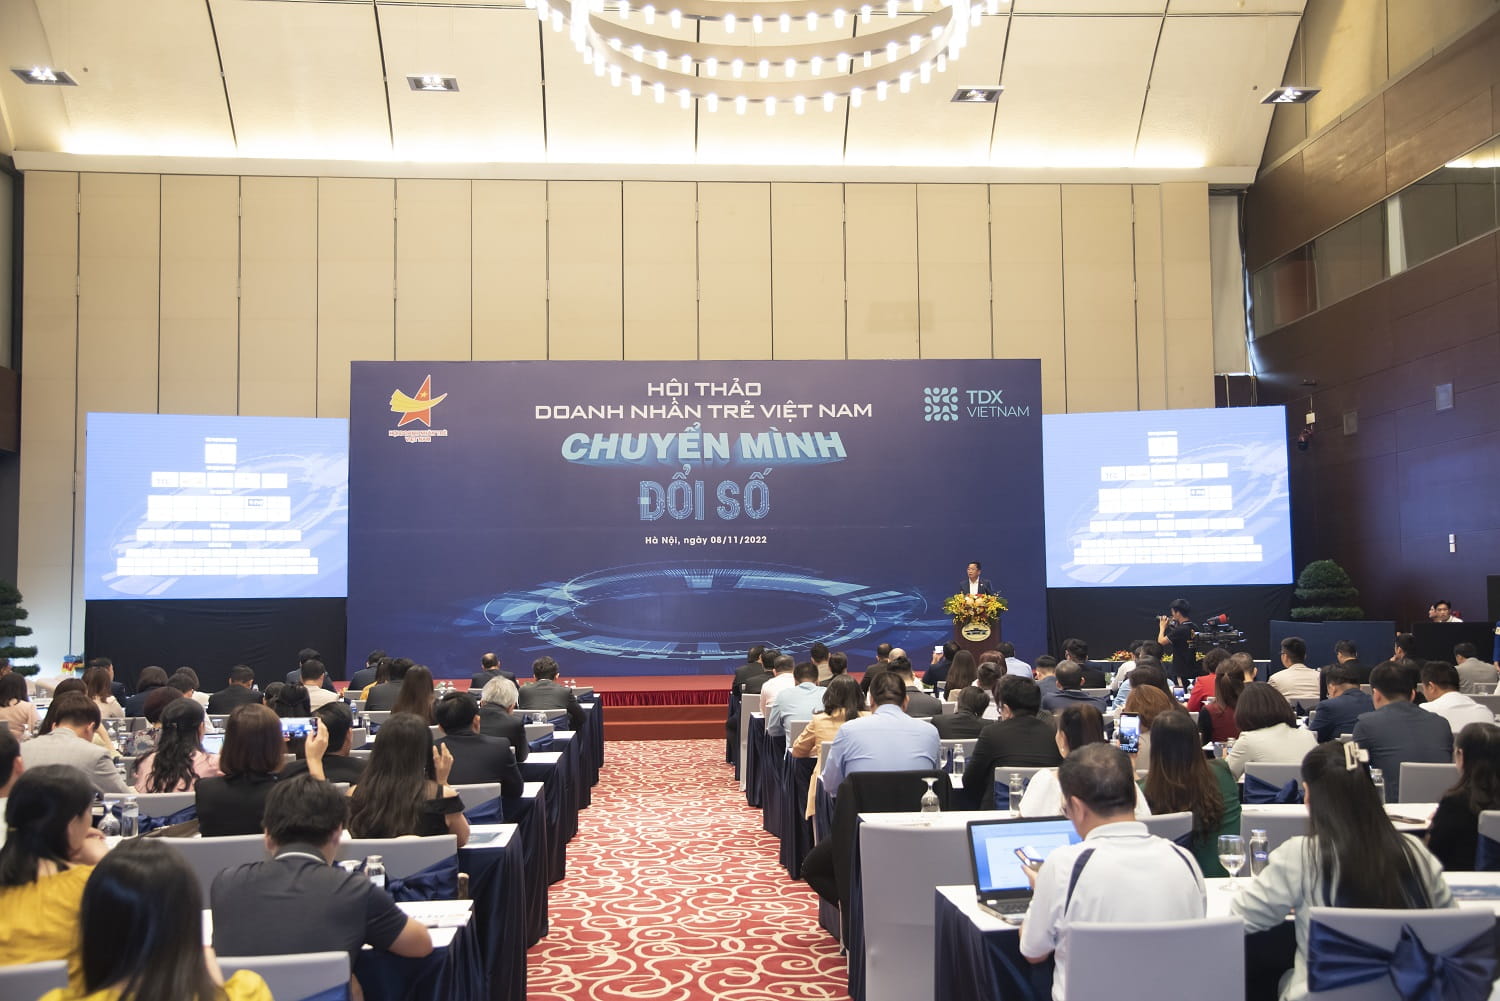 An overview of the "Young Vietnamese Entrepreneurs with Digital Transformation" conference that took place on November 8, 2022